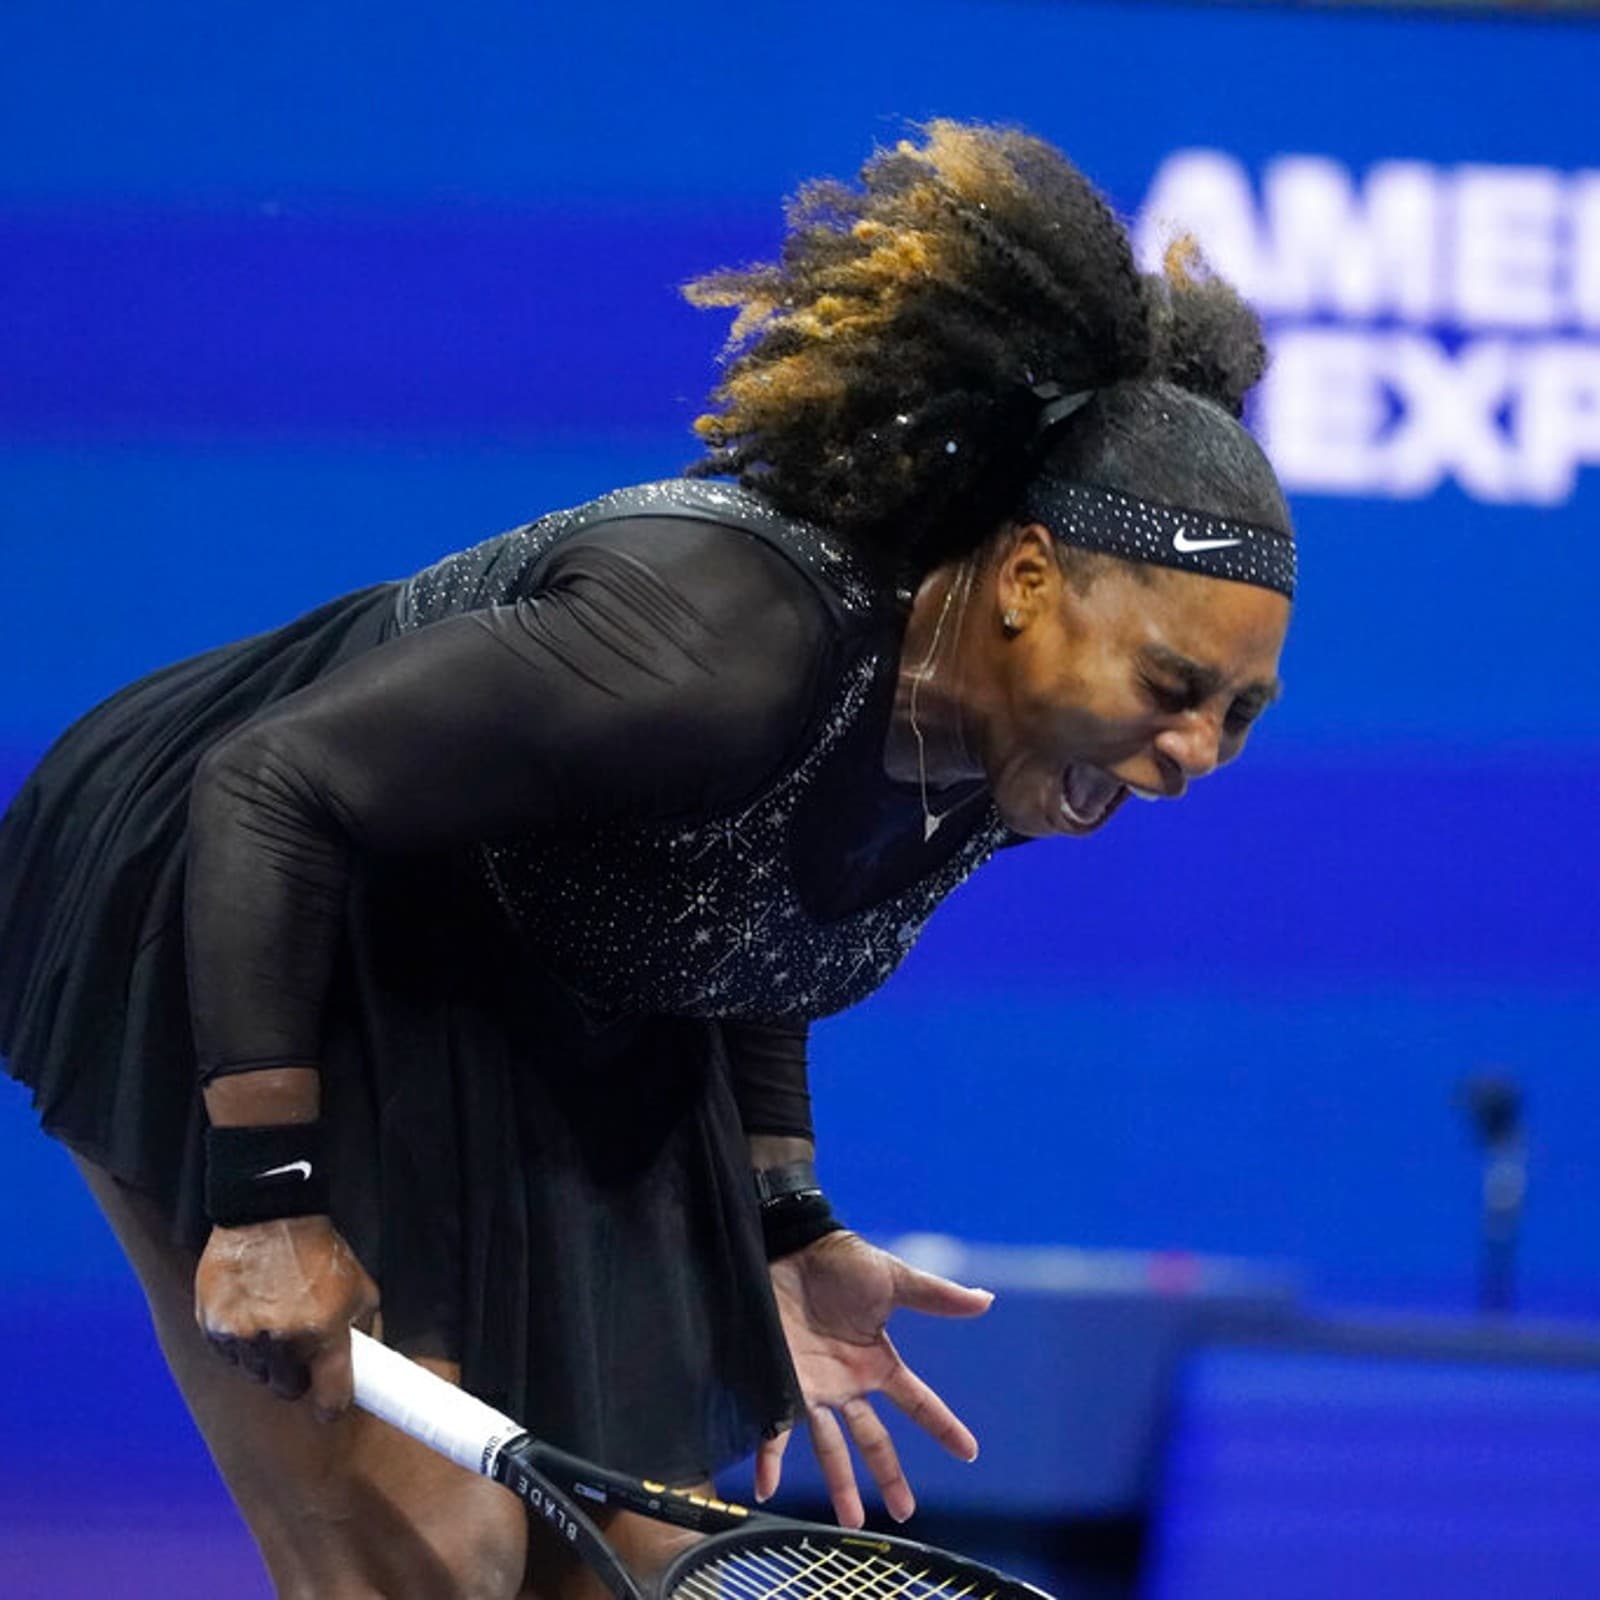 US Open 2022 Serena Williams Goes Down to Ajla Tomljanovic in What Could be Her Last Game